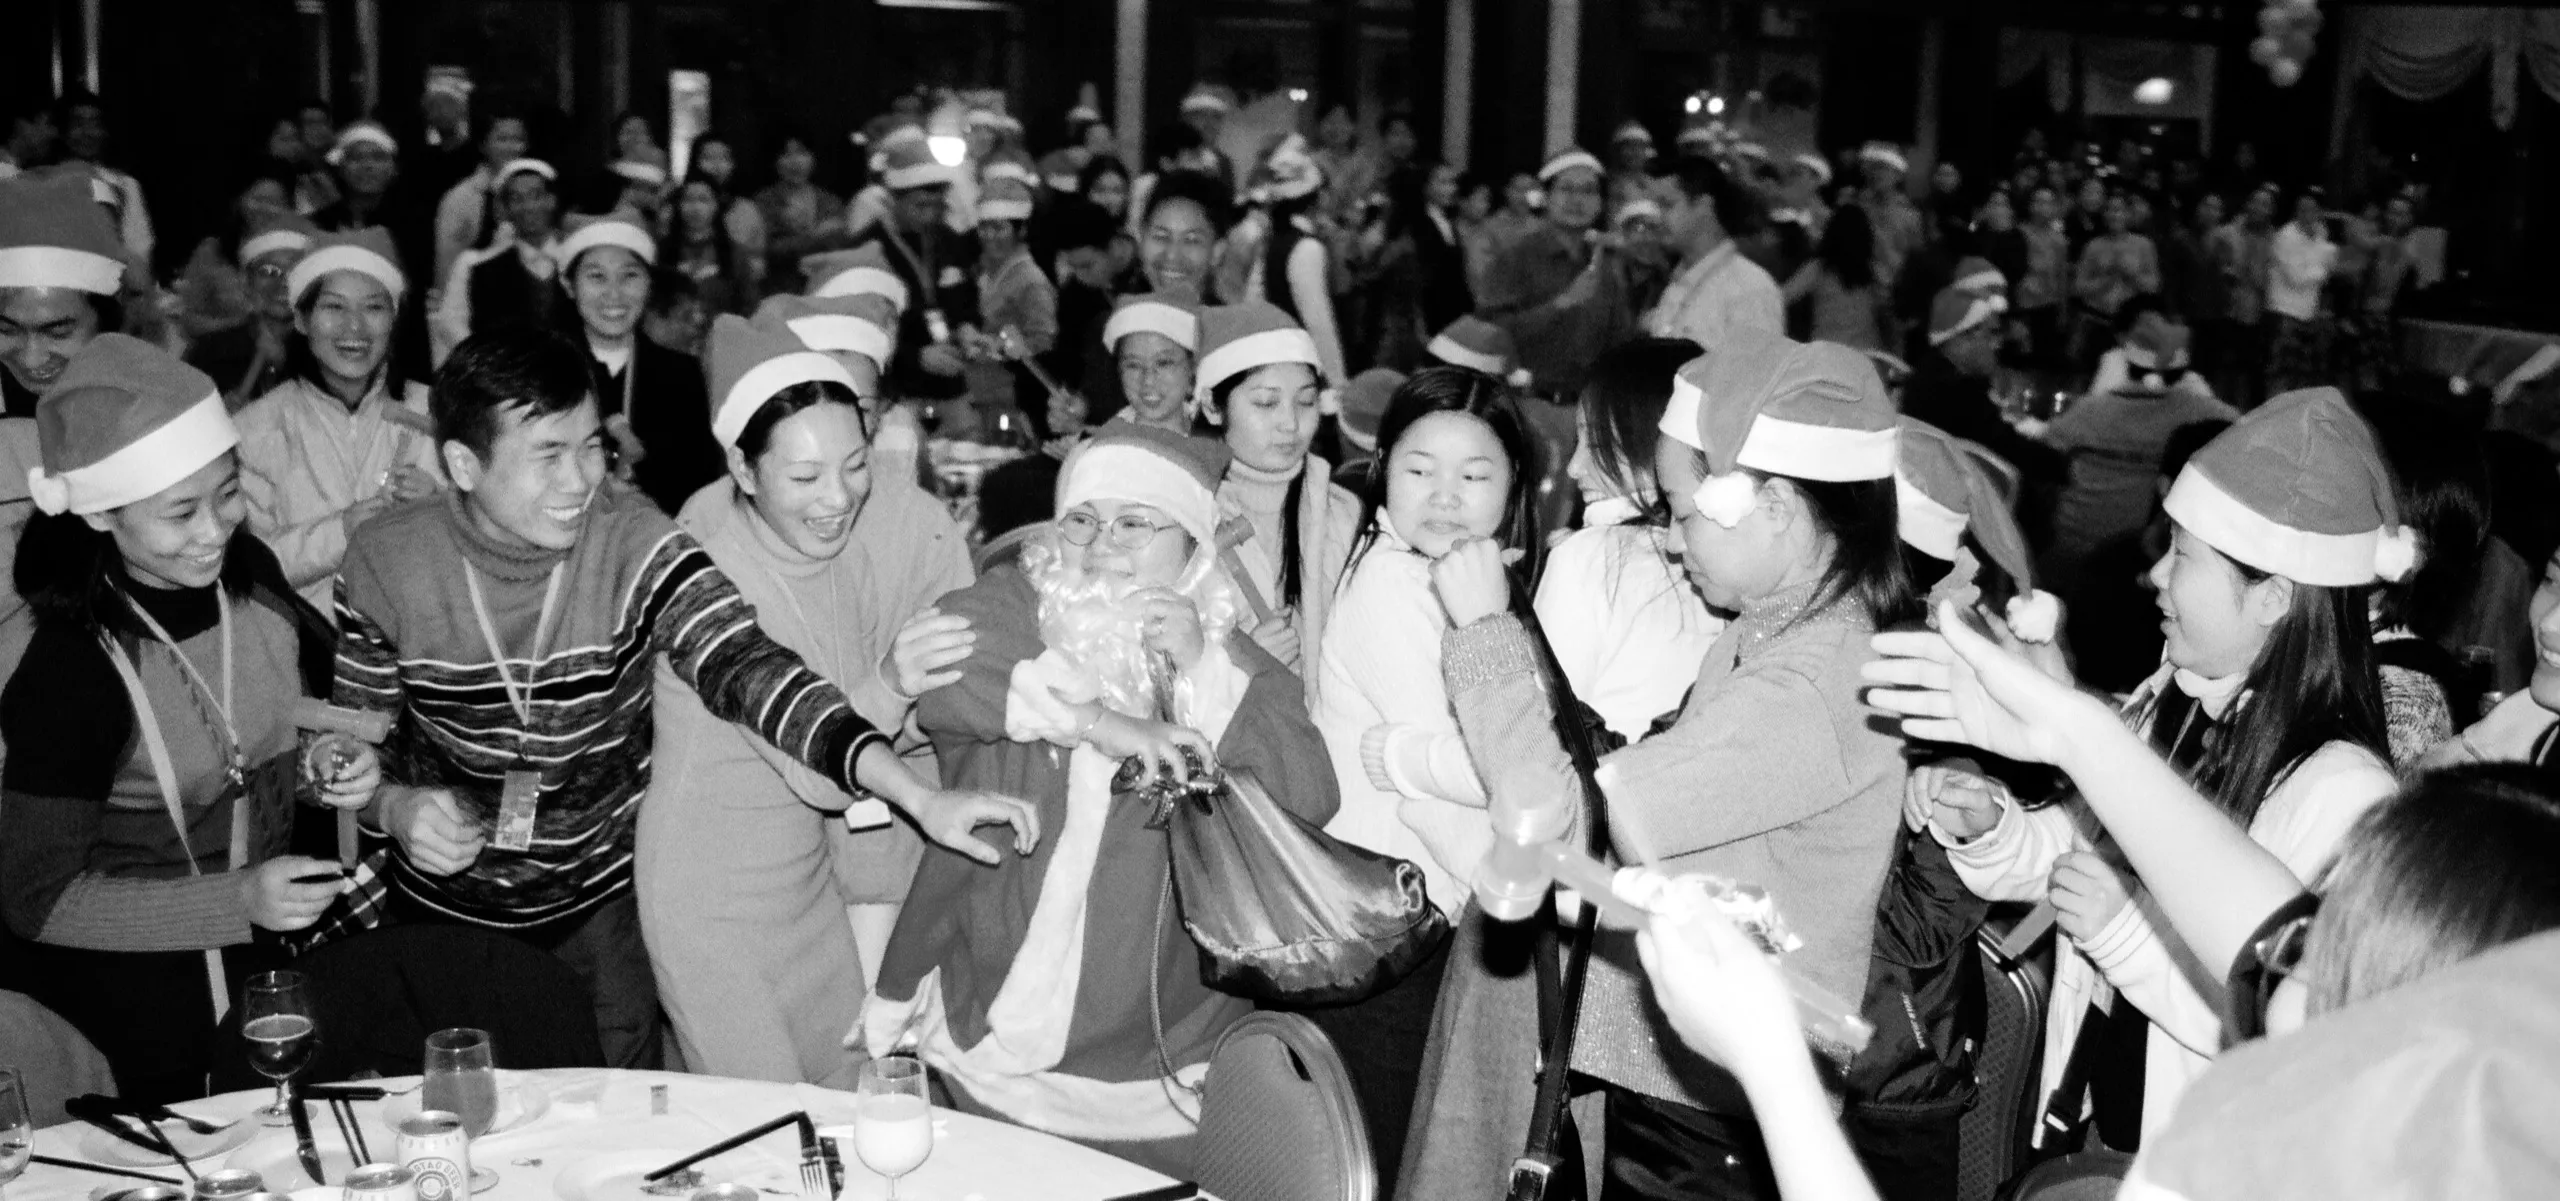 Celebrating Christmas at a hotel in Dongguan in 2004